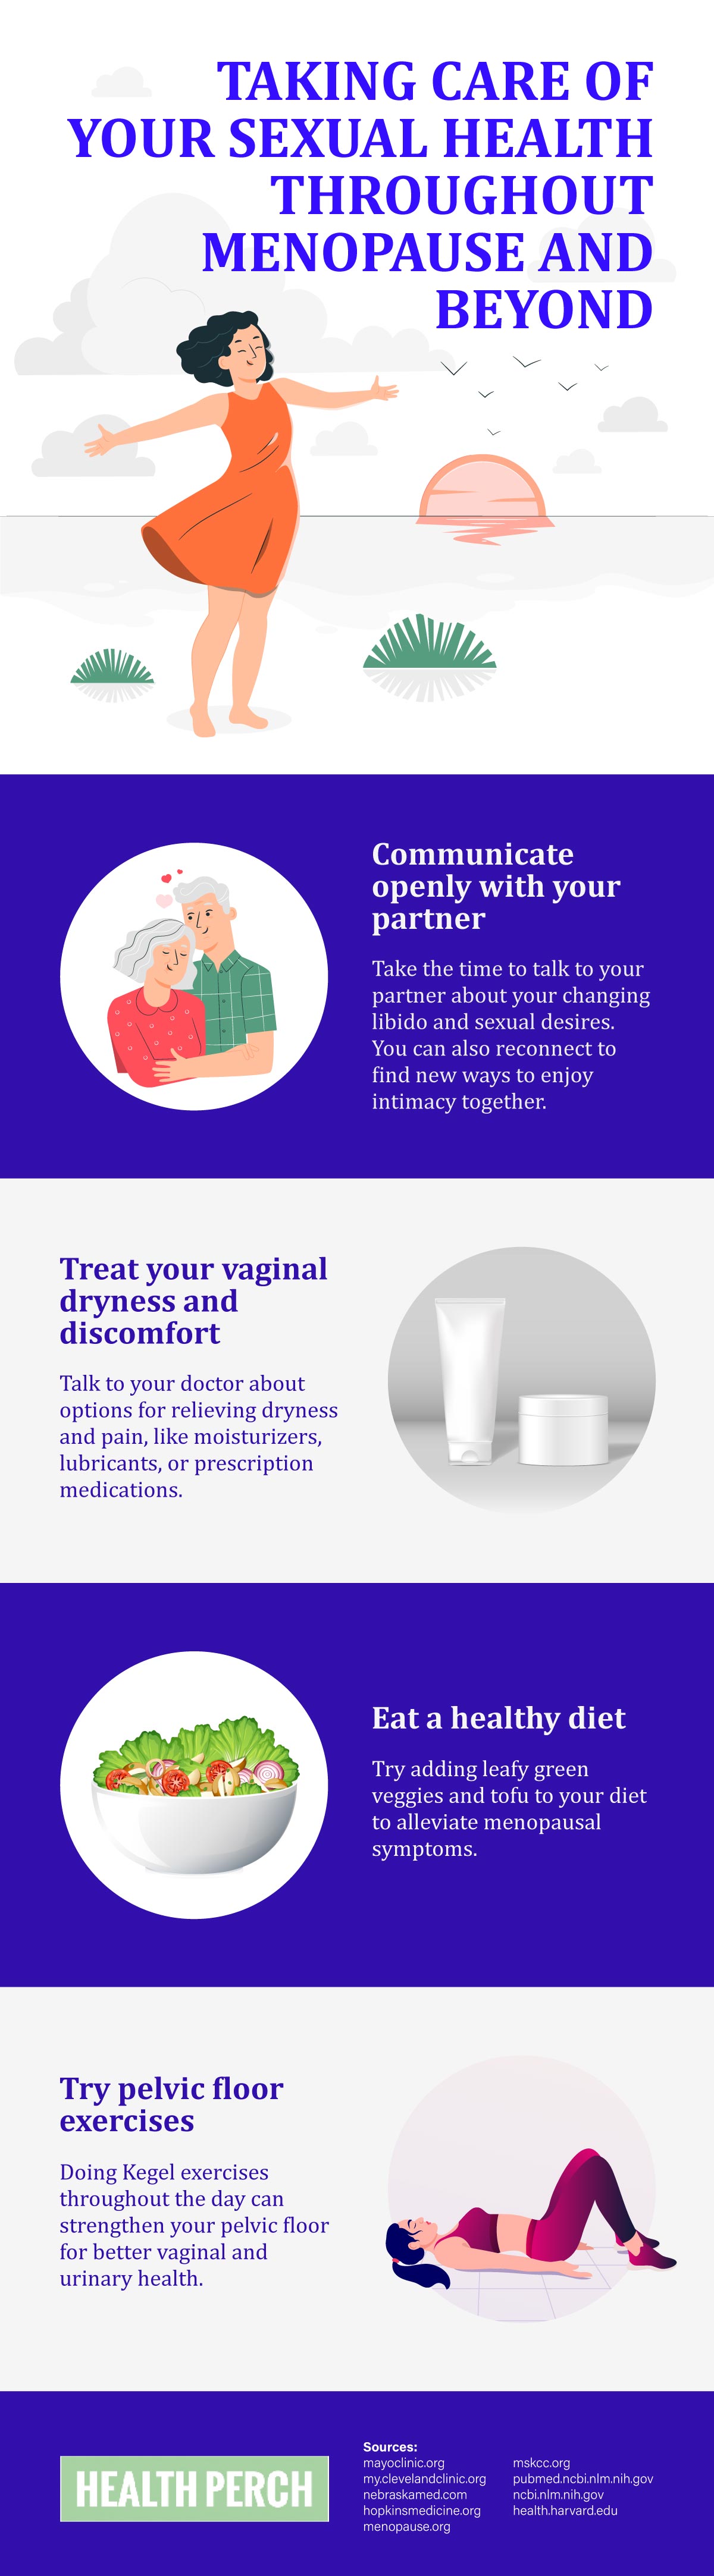 Boosting Your Sexual Health During Menopause and Beyond Infographic